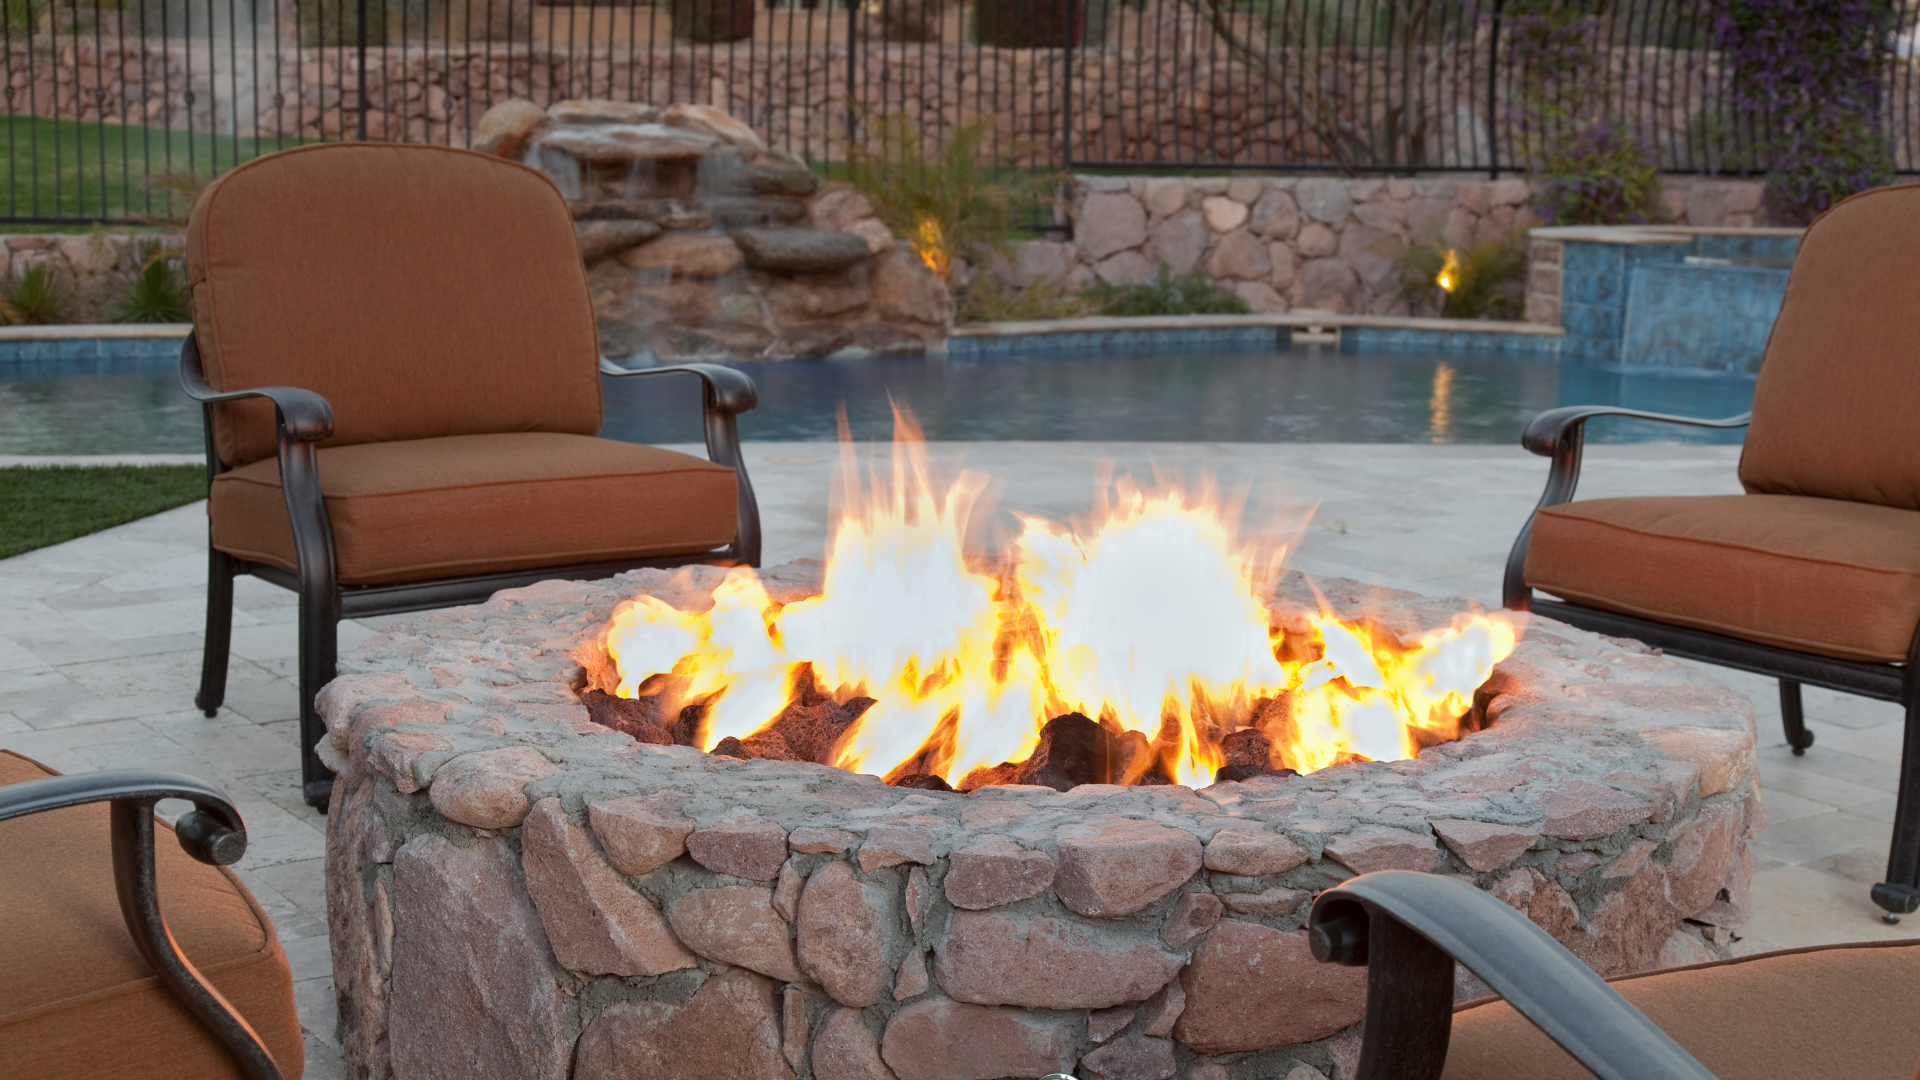 Real estate photos - backyard stone firepit by swimming pool with patio chairs